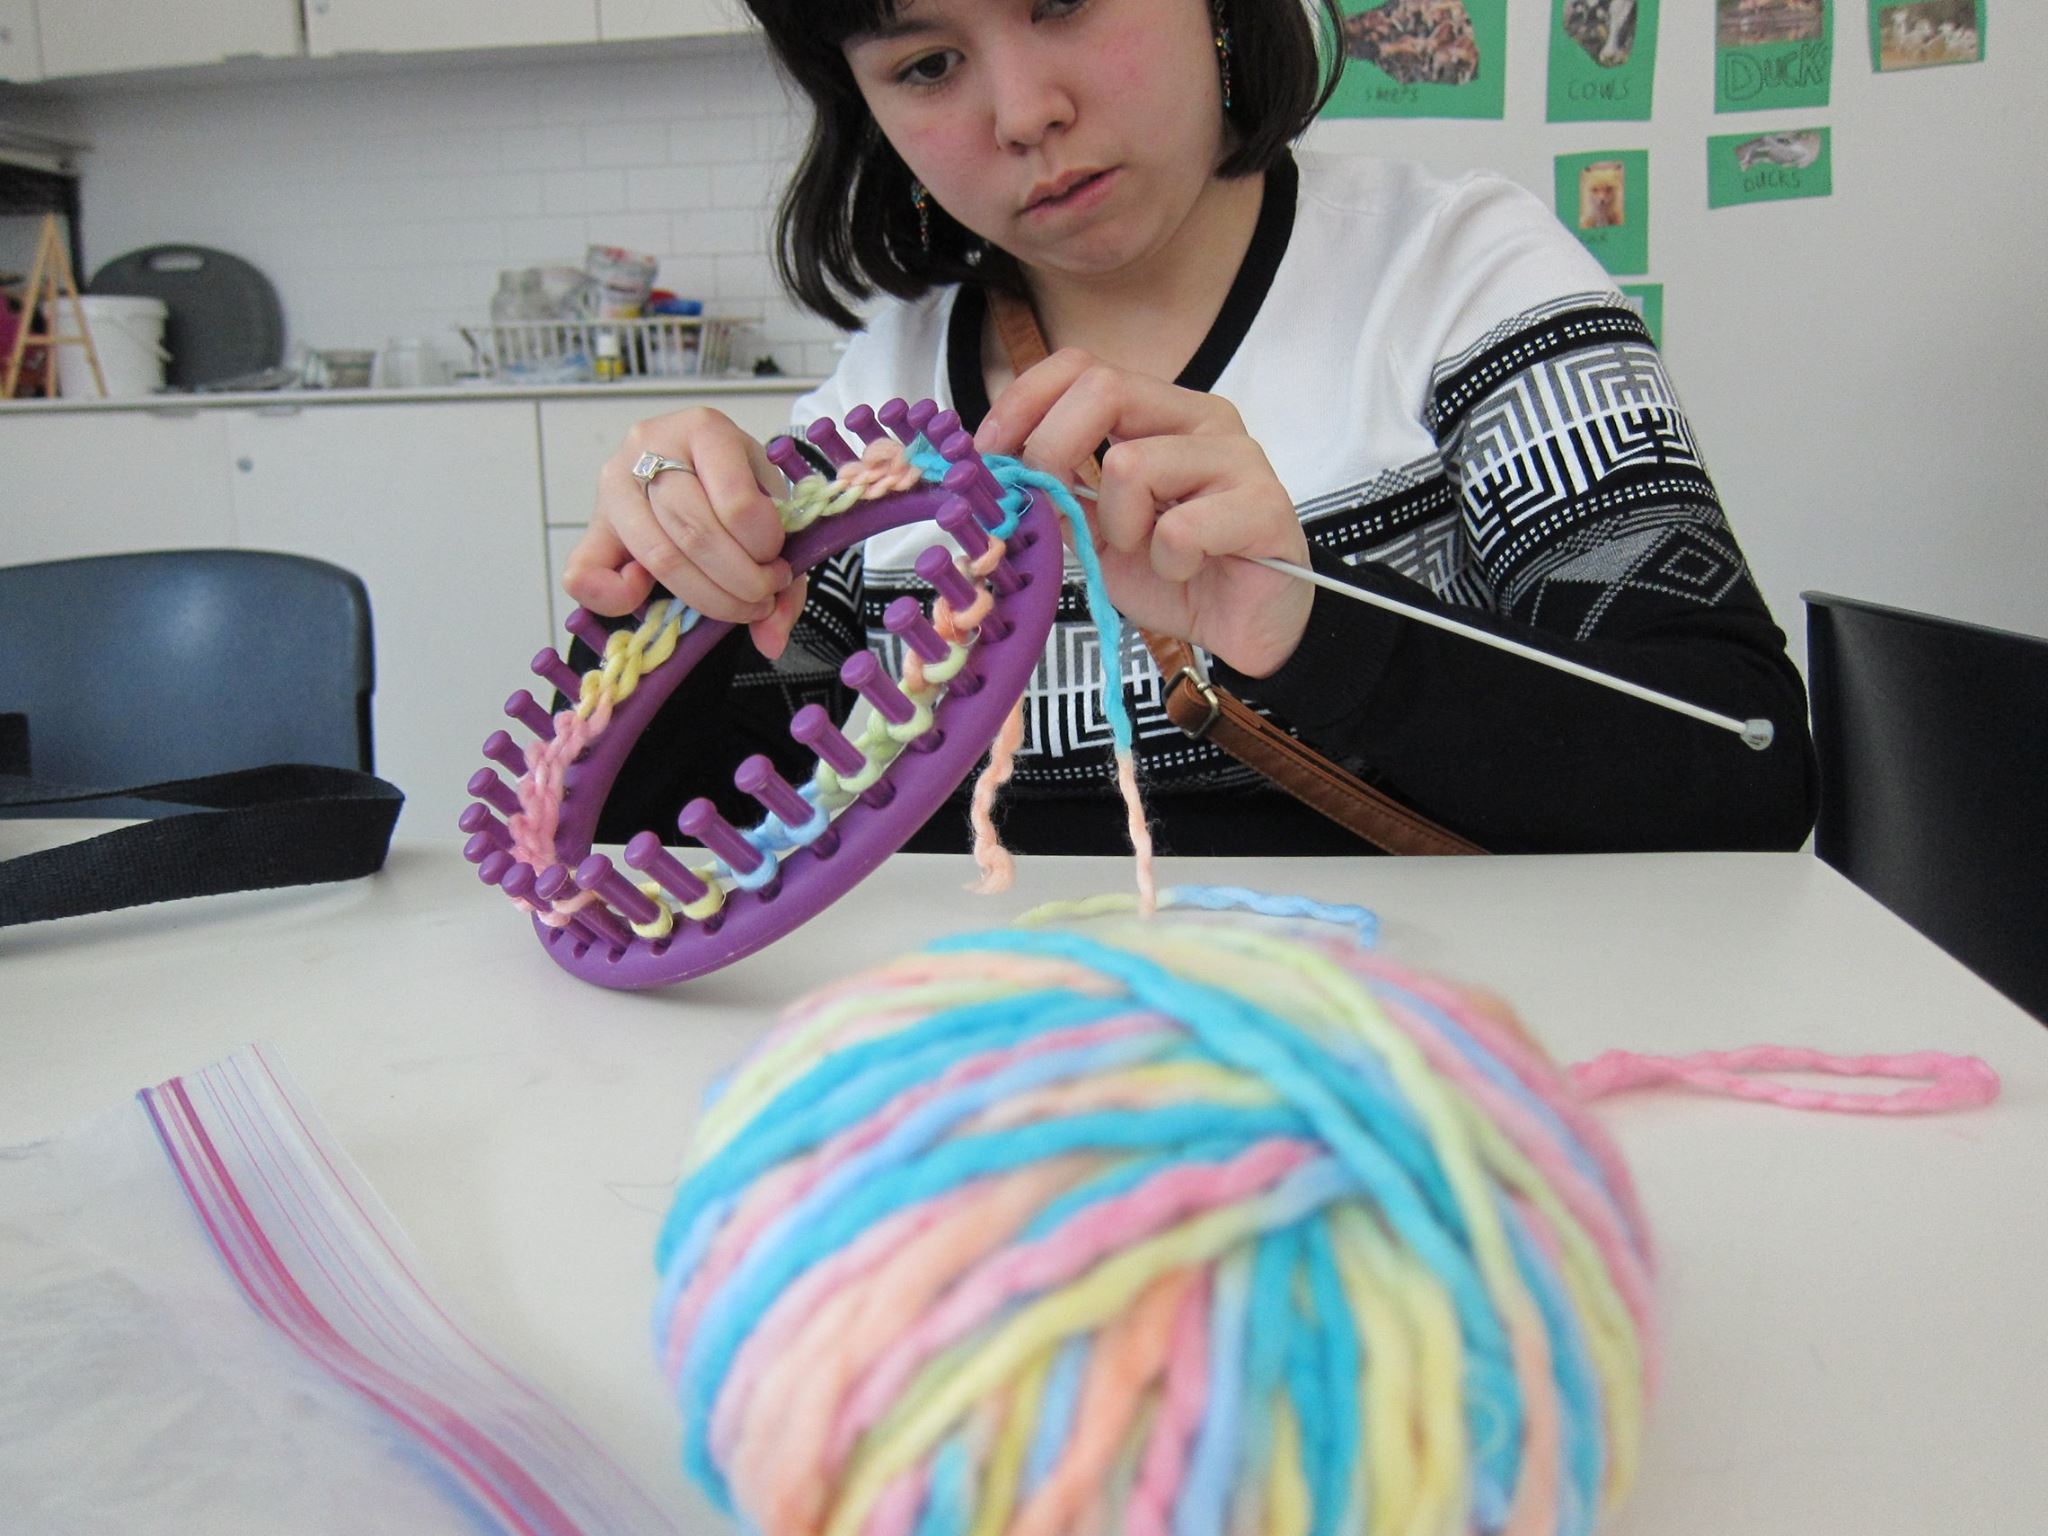 YMCA Academy students knit with a volunteer.